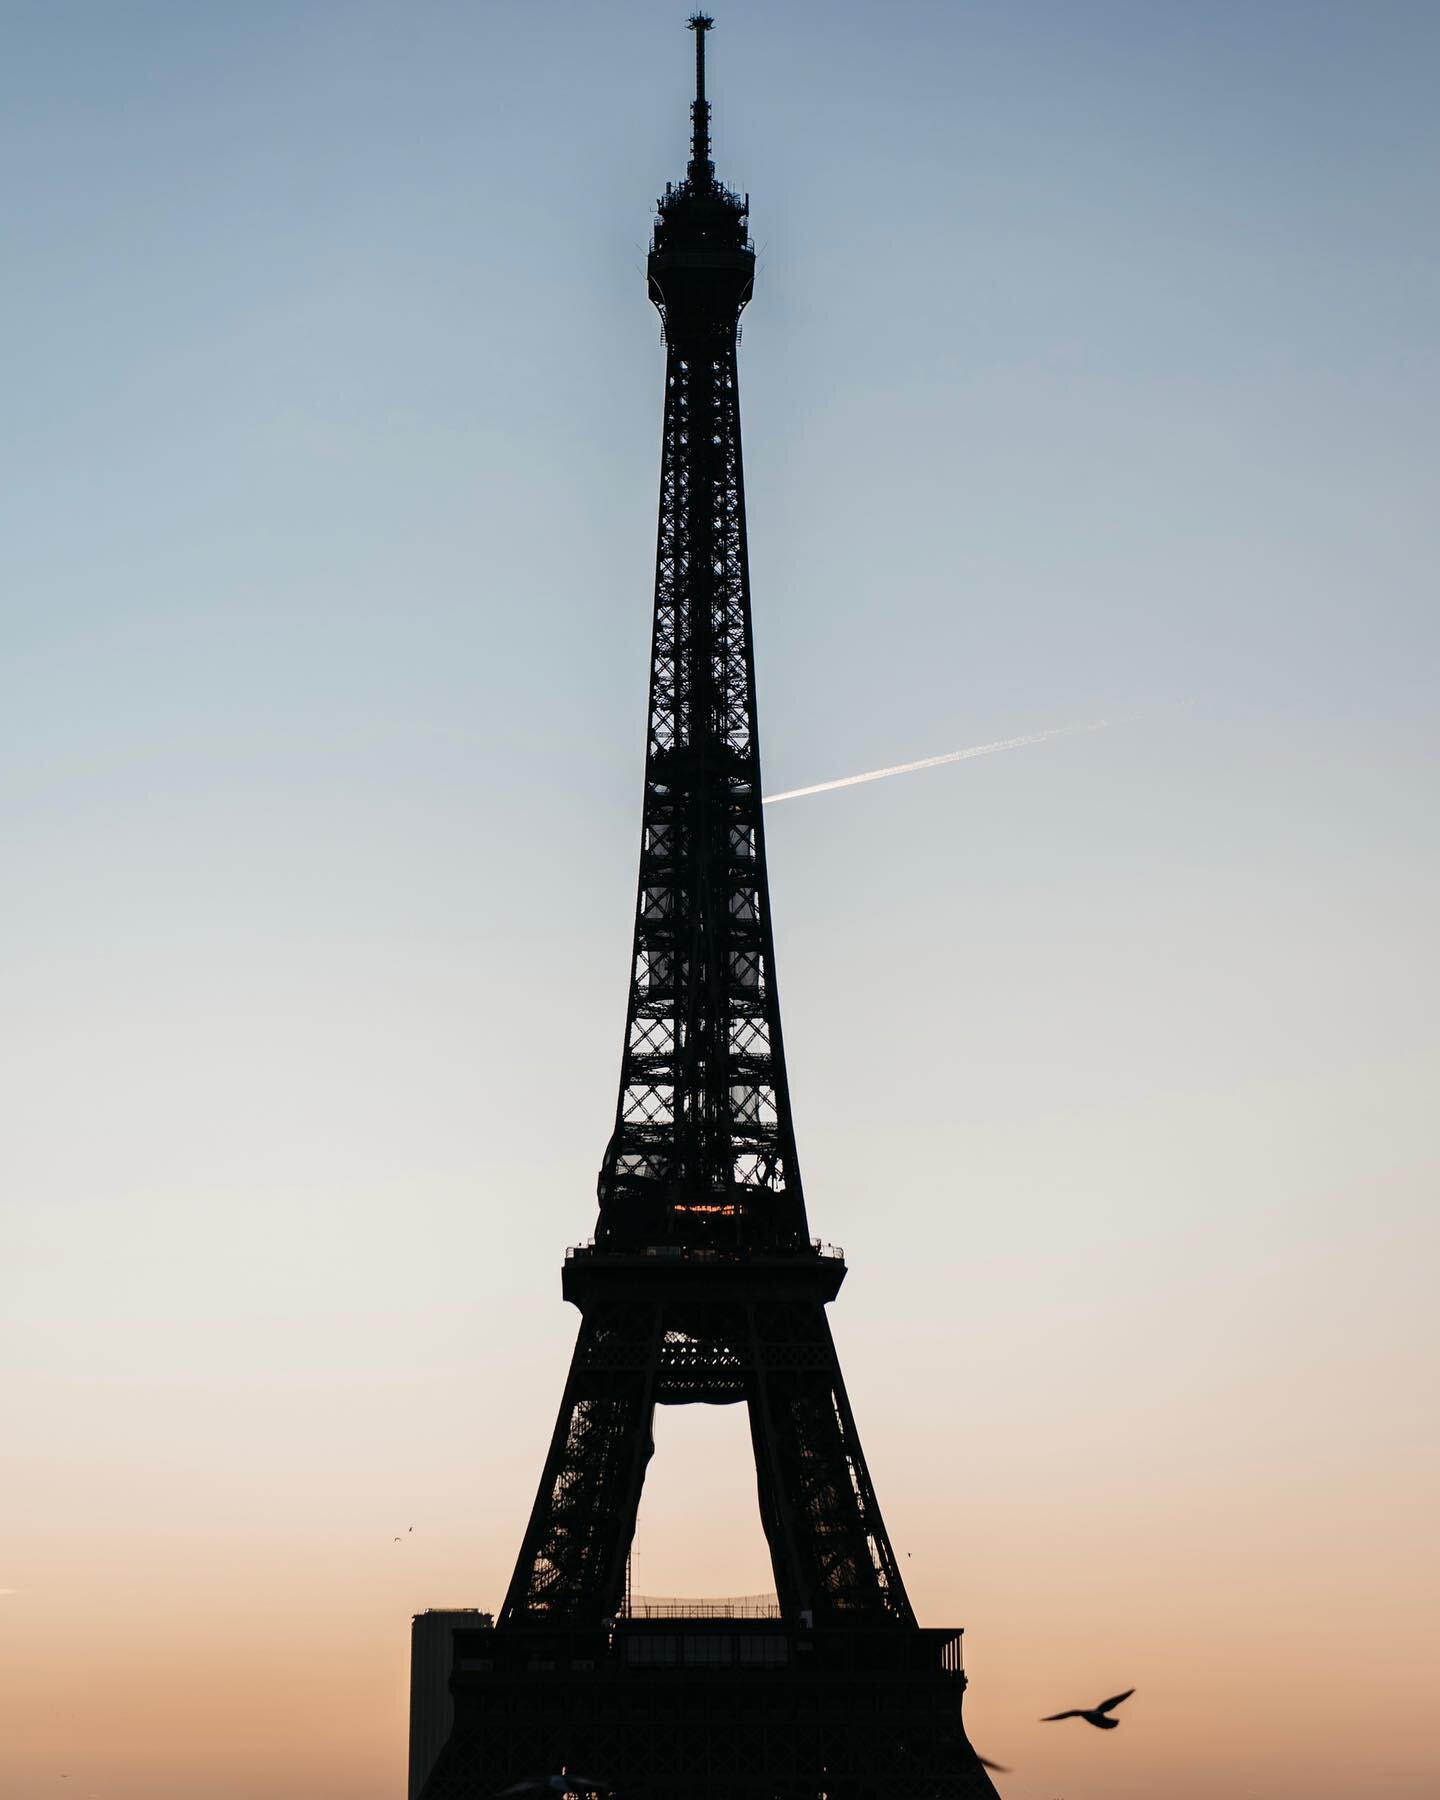 Happy first of February! Here&rsquo;s a wintery sunrise at la Tour Eiffel 

We&rsquo;re taking bookings for Spring now, and as I put new times into the calendar, I&rsquo;m getting more and more excited about the days extending &amp; the beautiful S